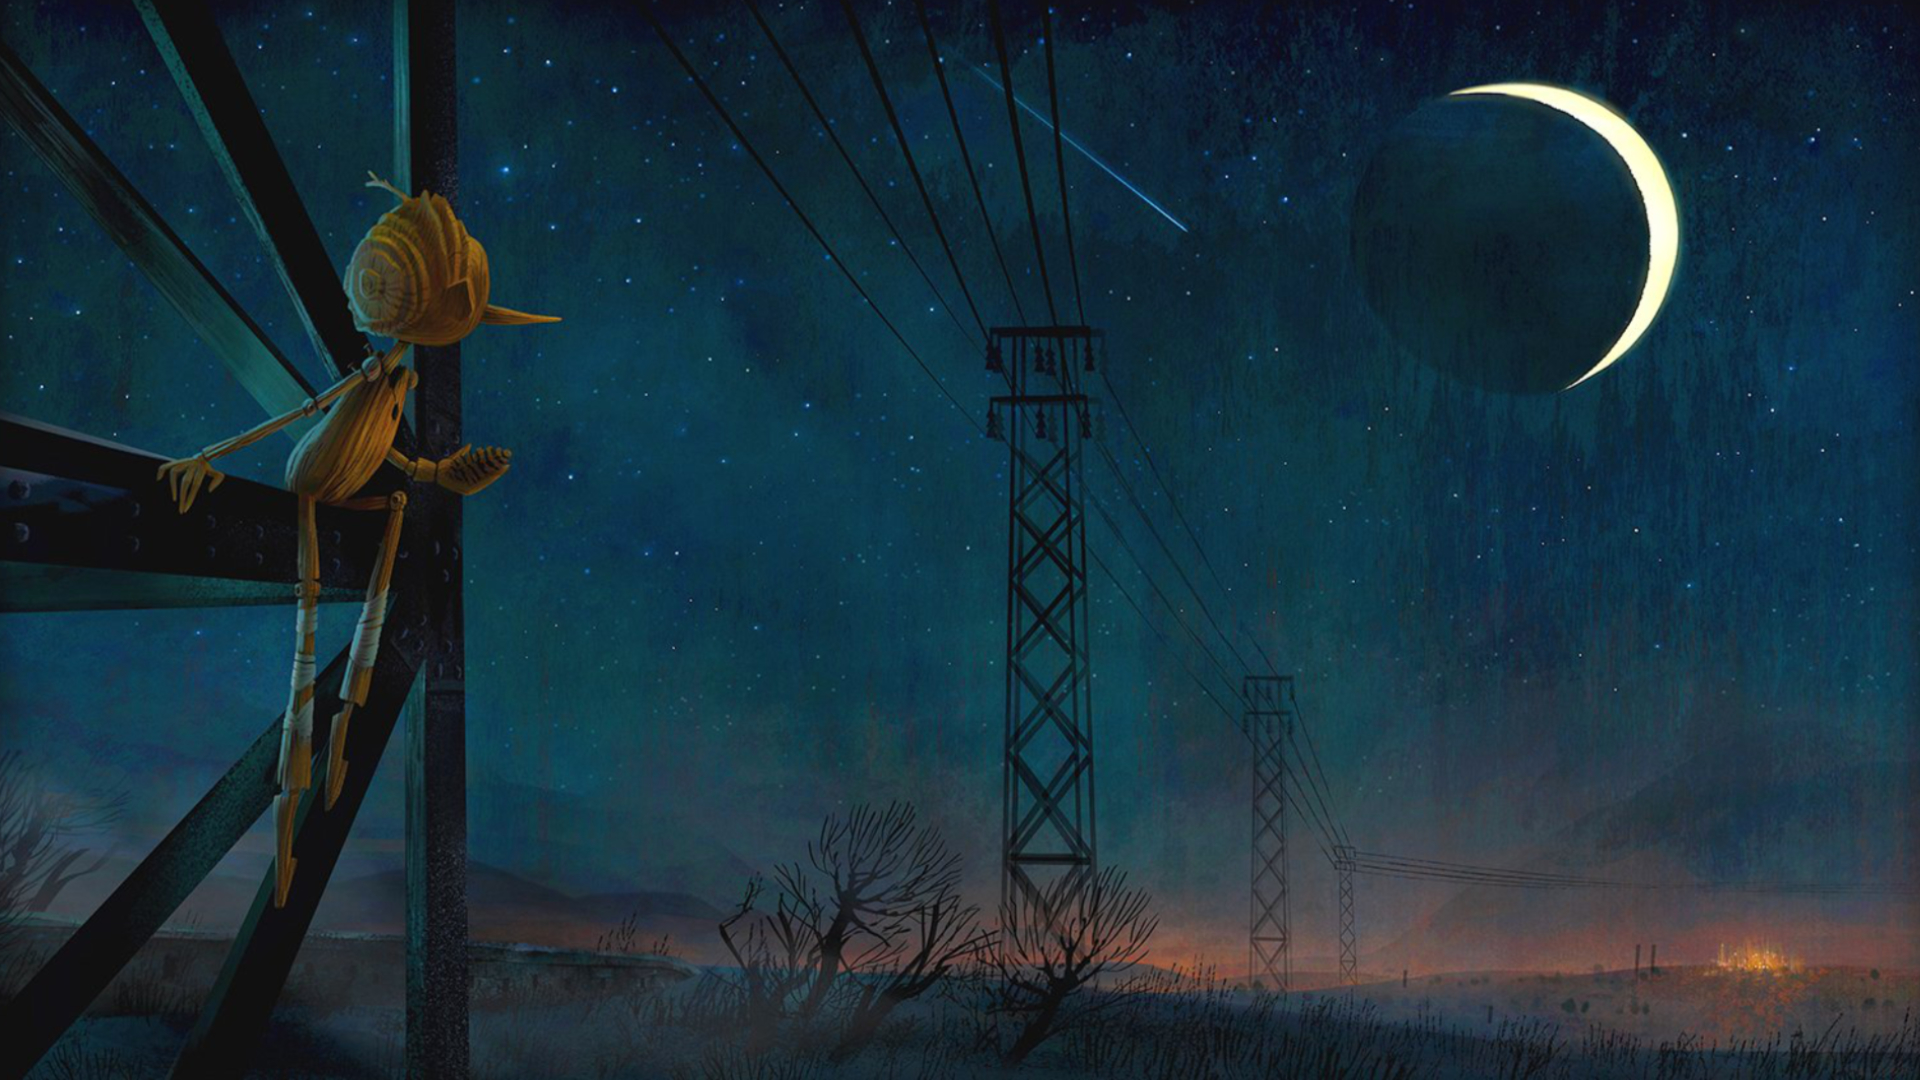 This VisDev painting by Jenn Ely for Guillermo del Toro’s Pinocchio depicts the titular character sitting on the metal bars of a transmission tower and staring longingly at a distant city, which is nothing more than a small orange spec underneath a vast starry sky.